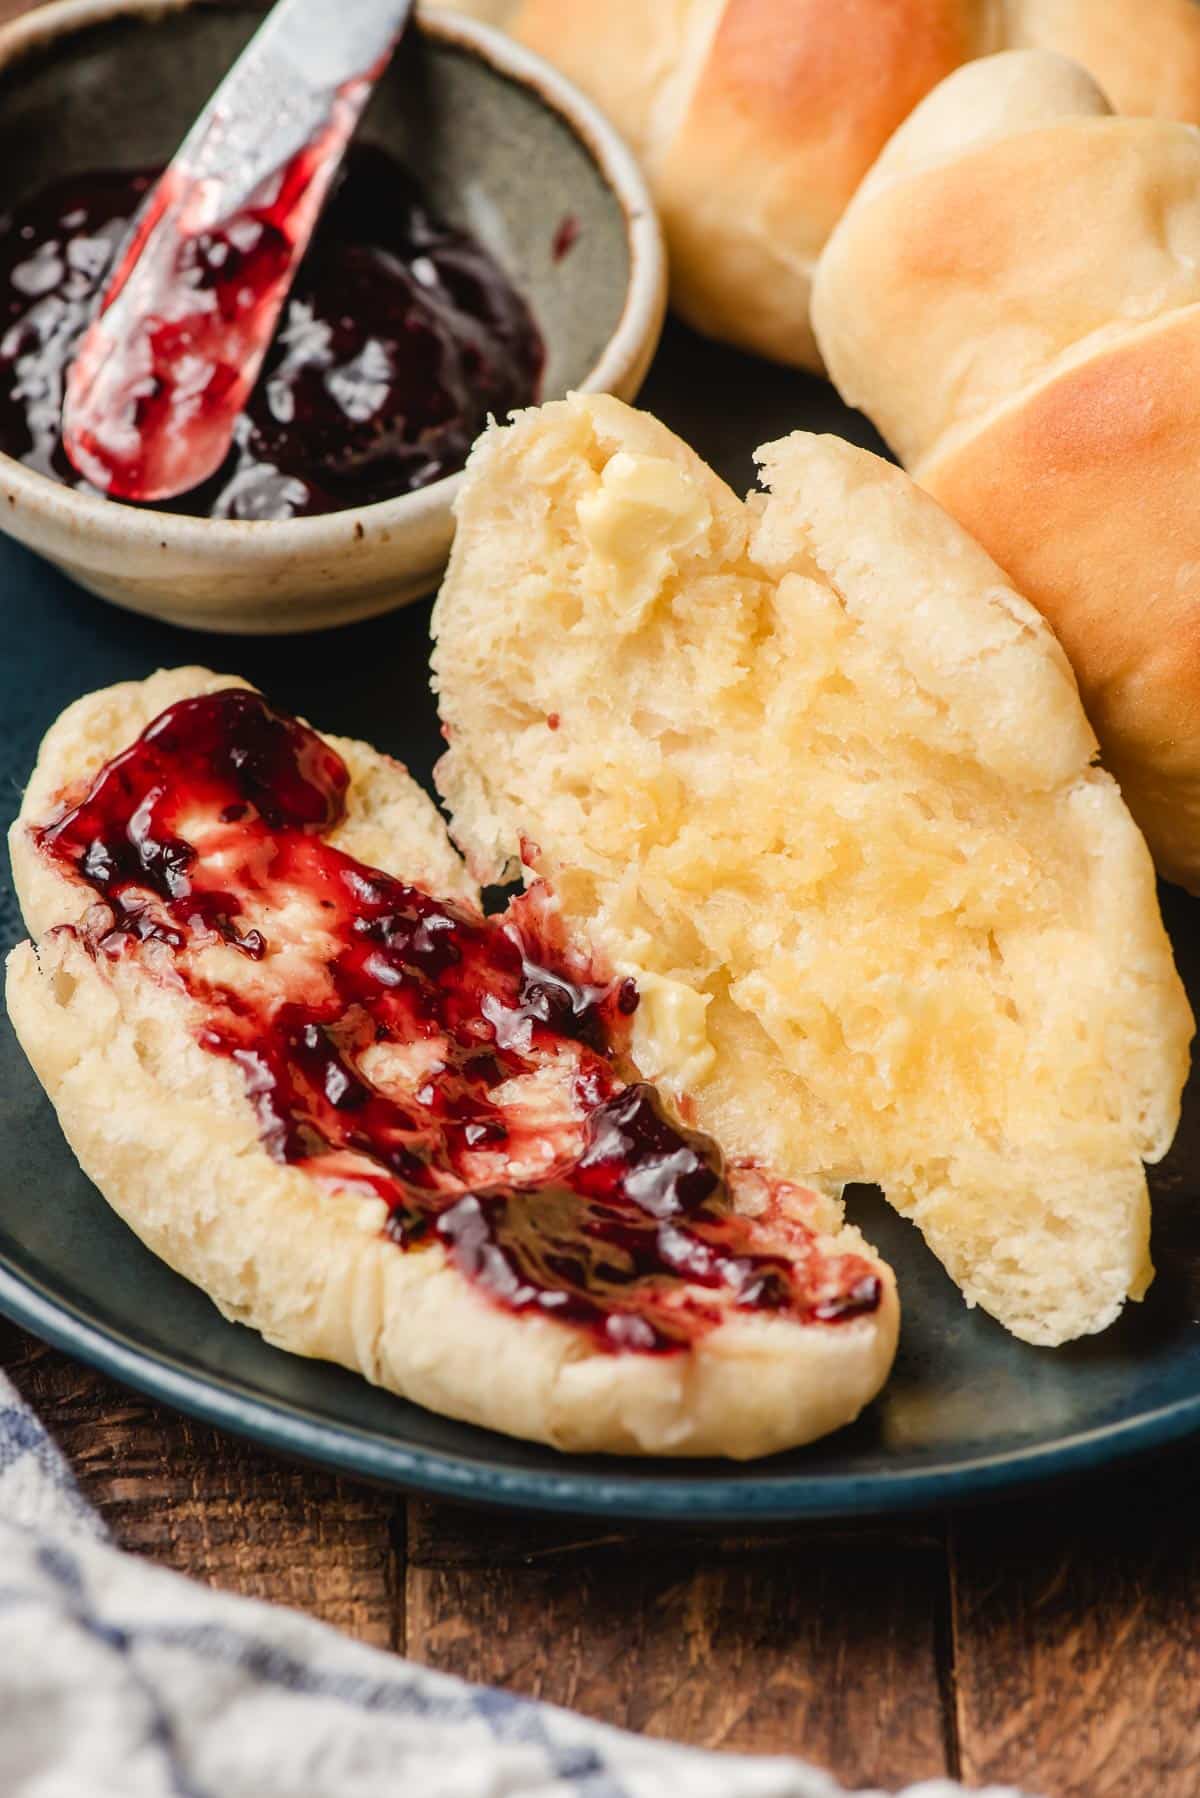 Jam and dinner rolls on a plate.